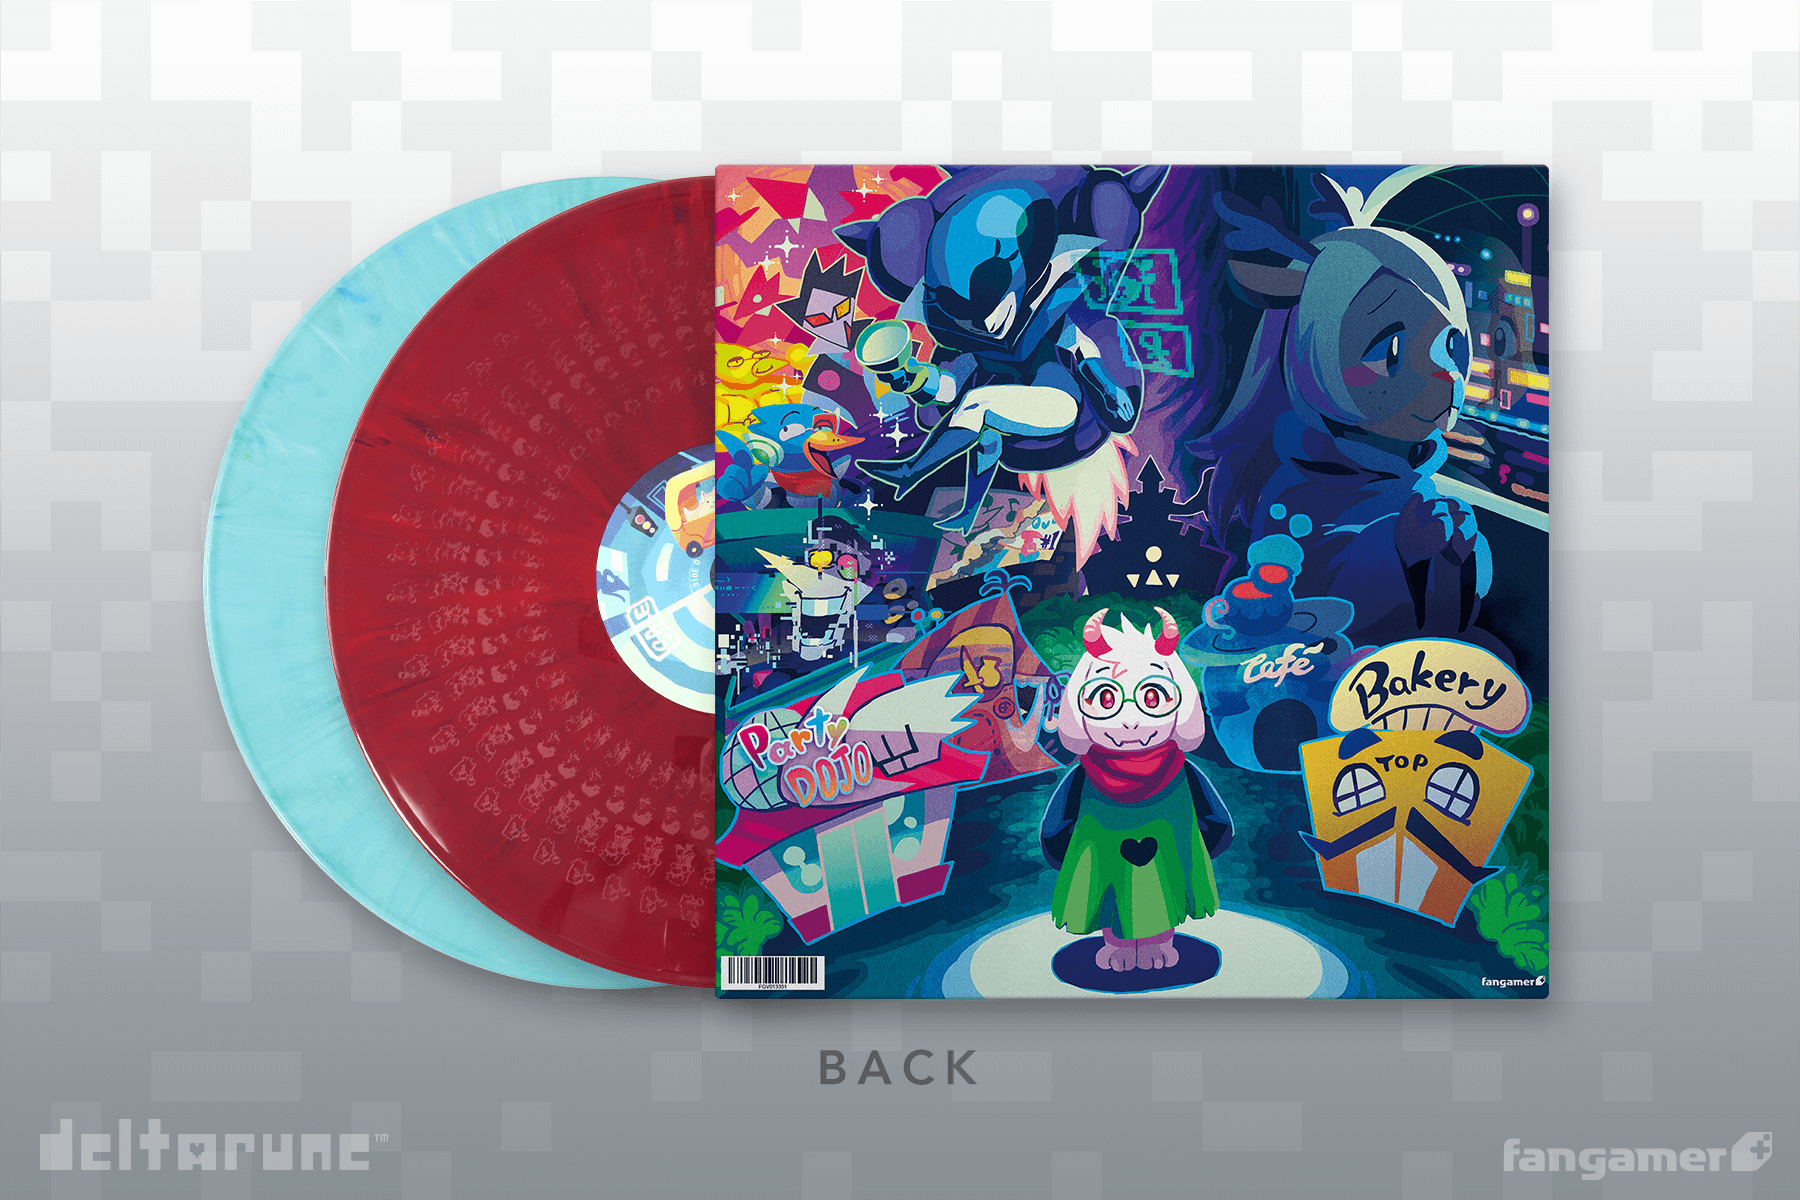 DELTRARUNE Chapter 2 Soundtrack on colored vinyl with back cover